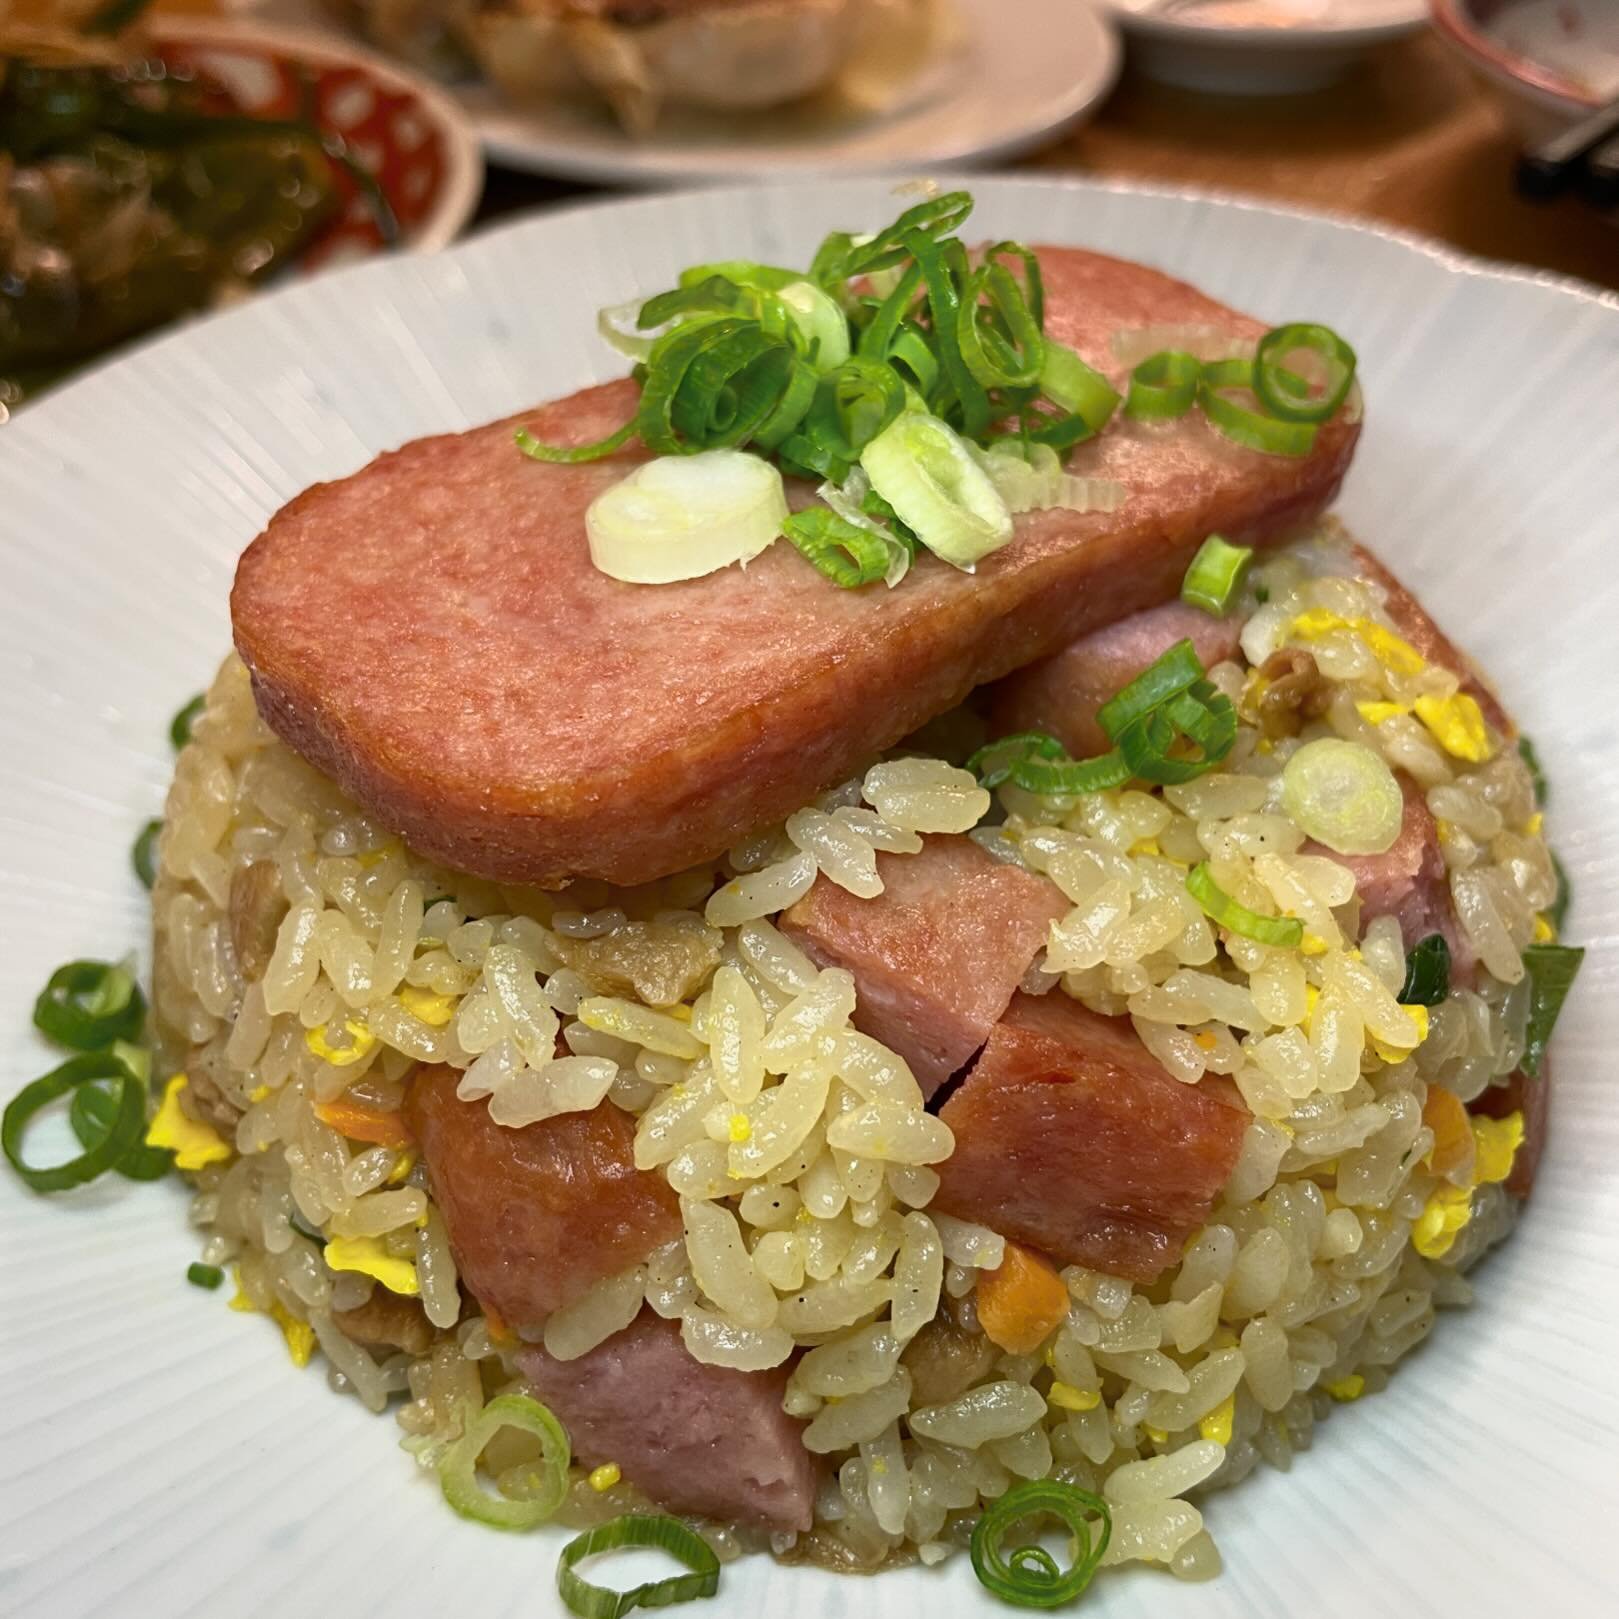 You can still enjoy special SPAM dishes such as this SPAM Fried Rice at @camado_ramen_izakaya until May 5 during our Dine In event!  Special dishes available at 15 Waikiki restaurants. 

https://www.spamjamhawaii.com/dine-in-locations